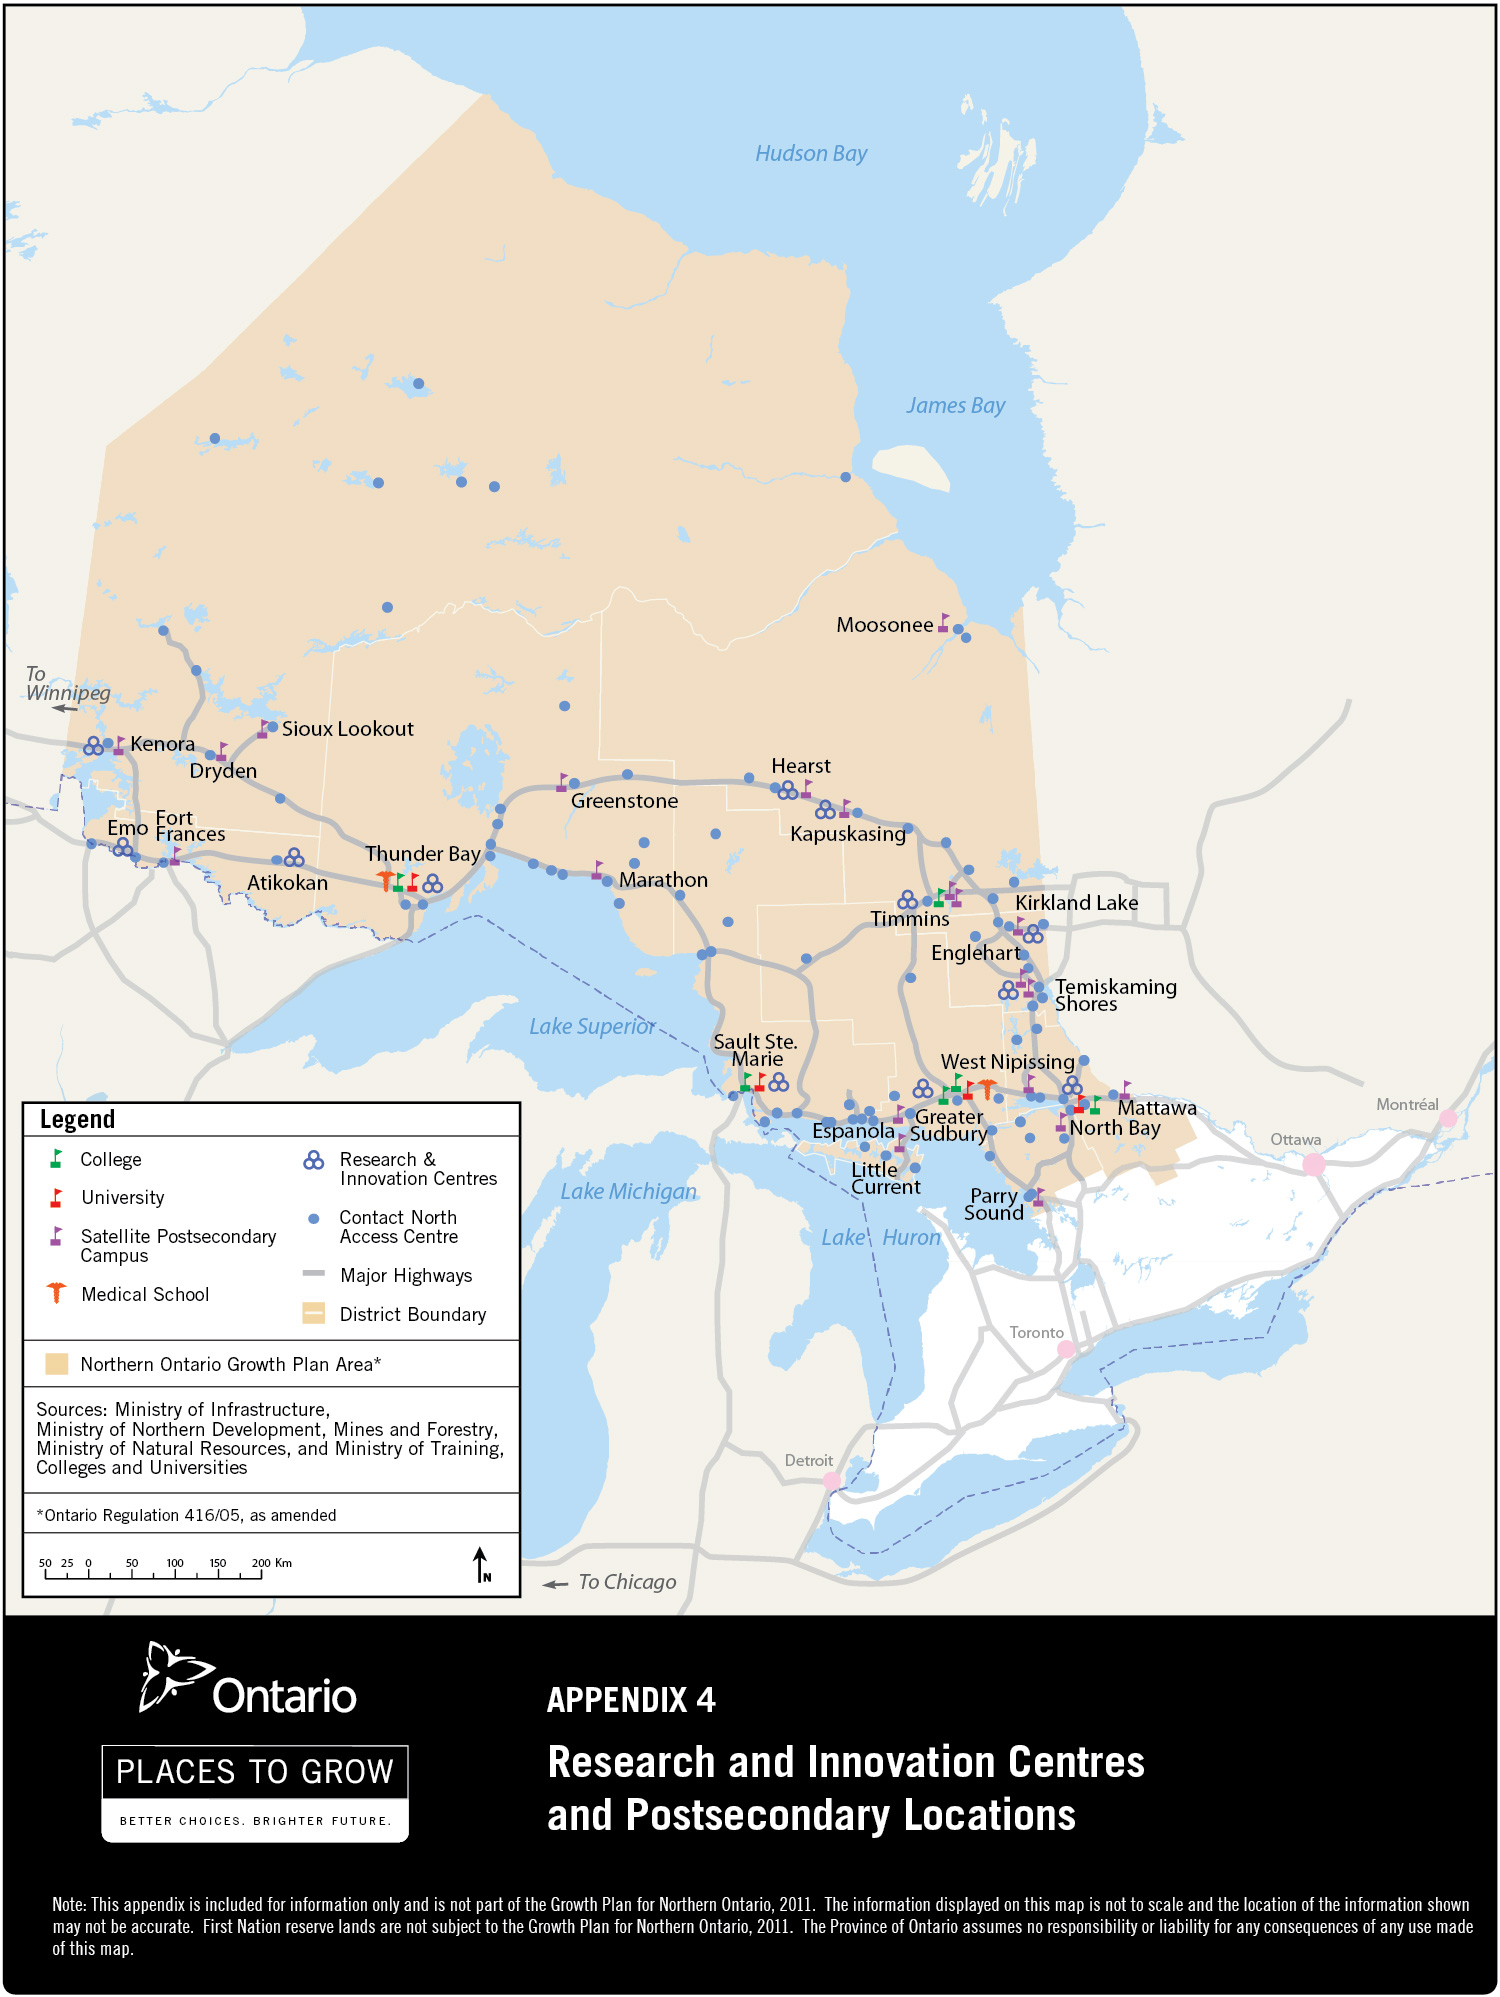 Research and Innovation Centres and Postsecondary Locations